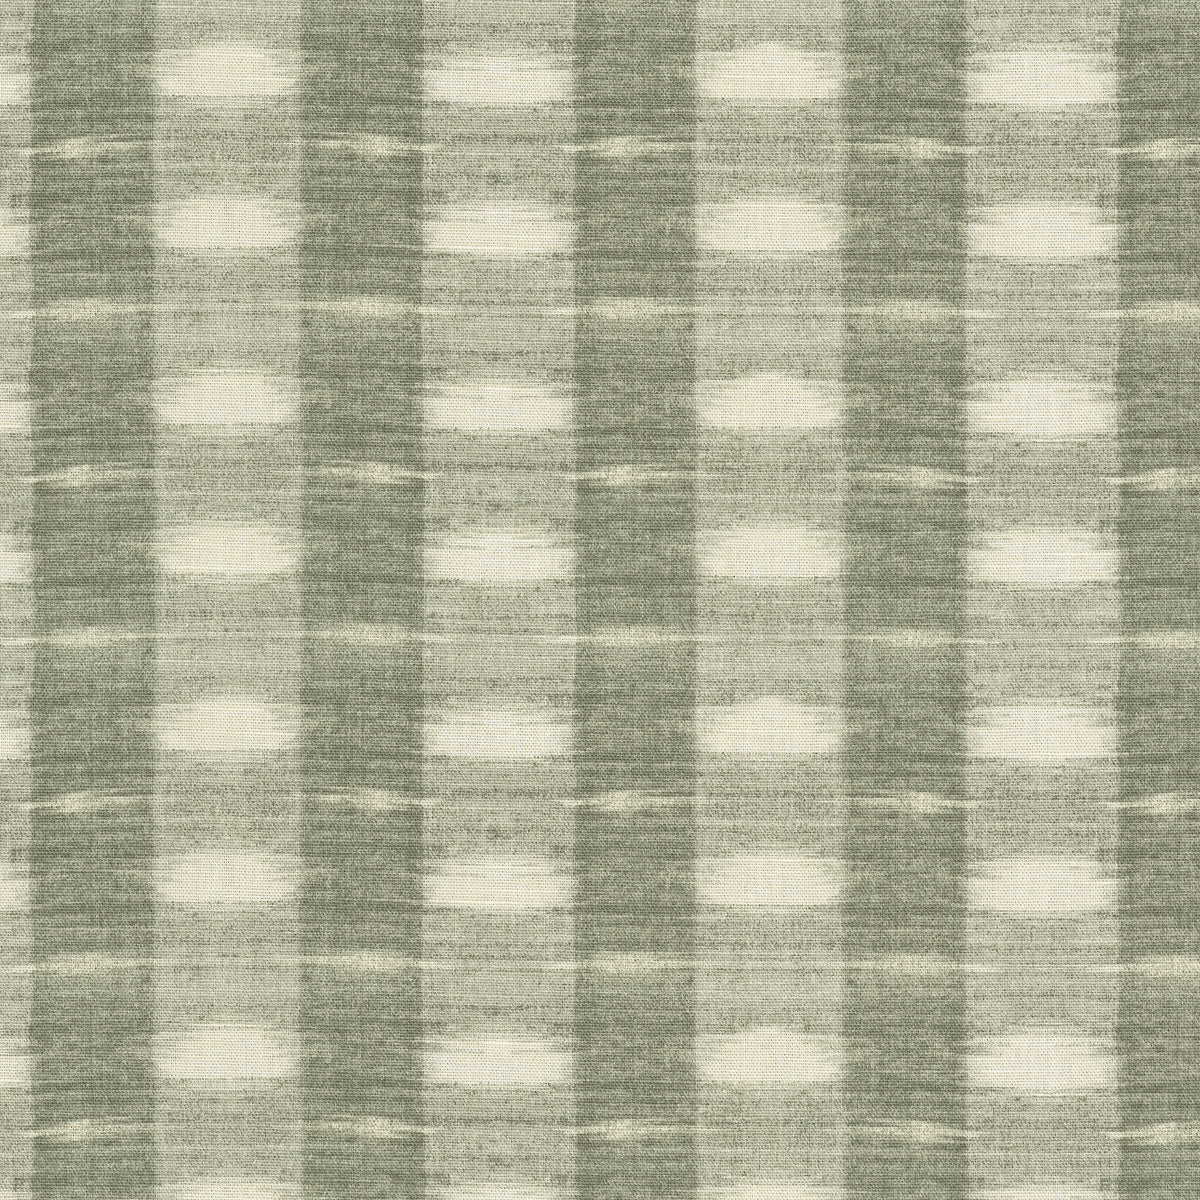 P/K Lifestyles Brushed Check - Shadow 412391 Upholstery Fabric